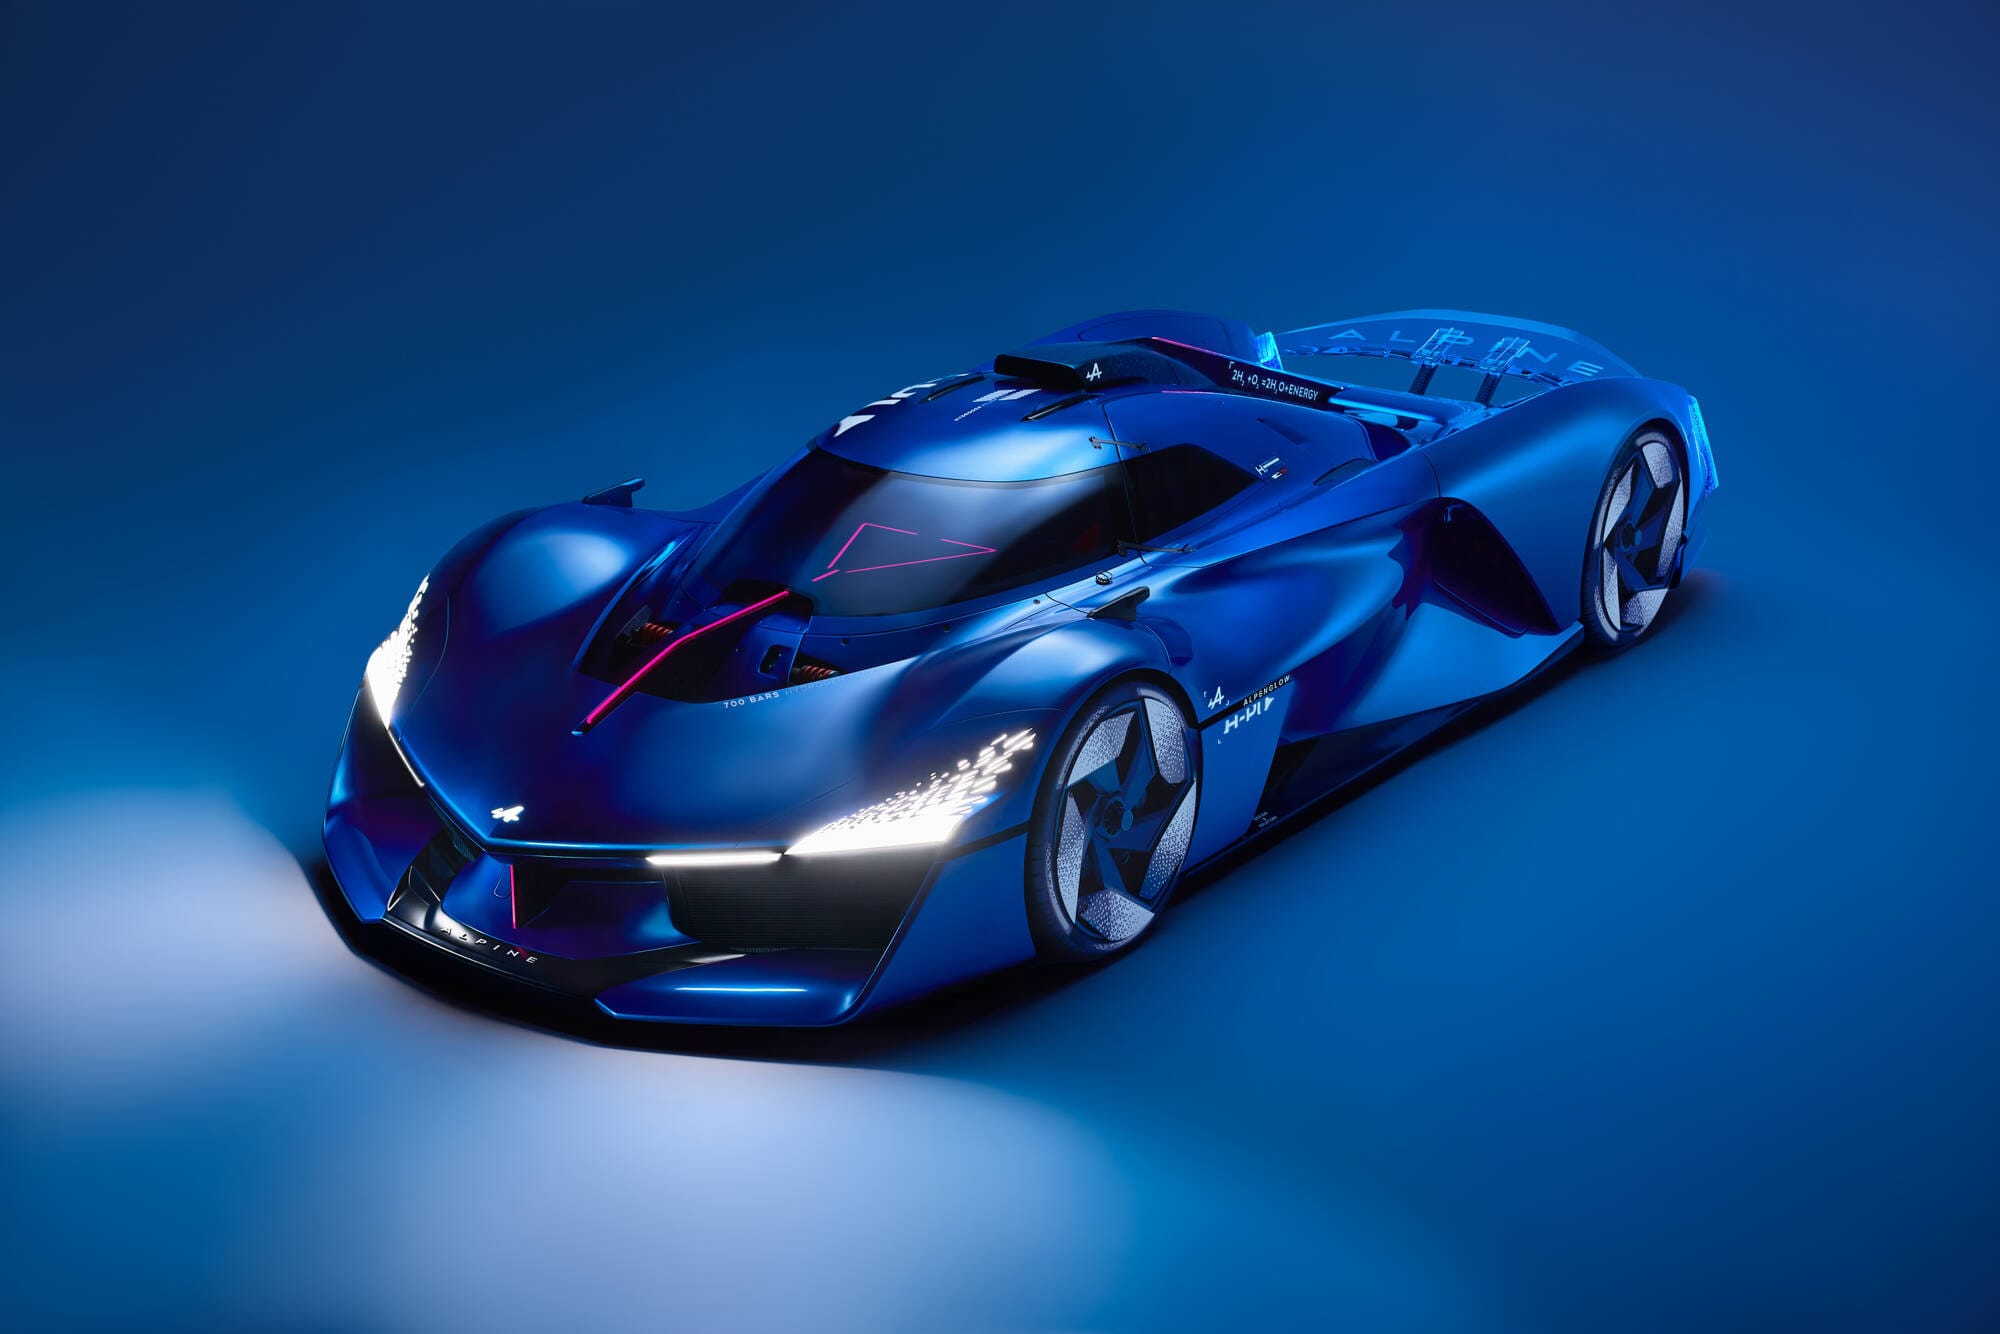 Alpine gives a glimpse of its potential WEC hydrogen intentions